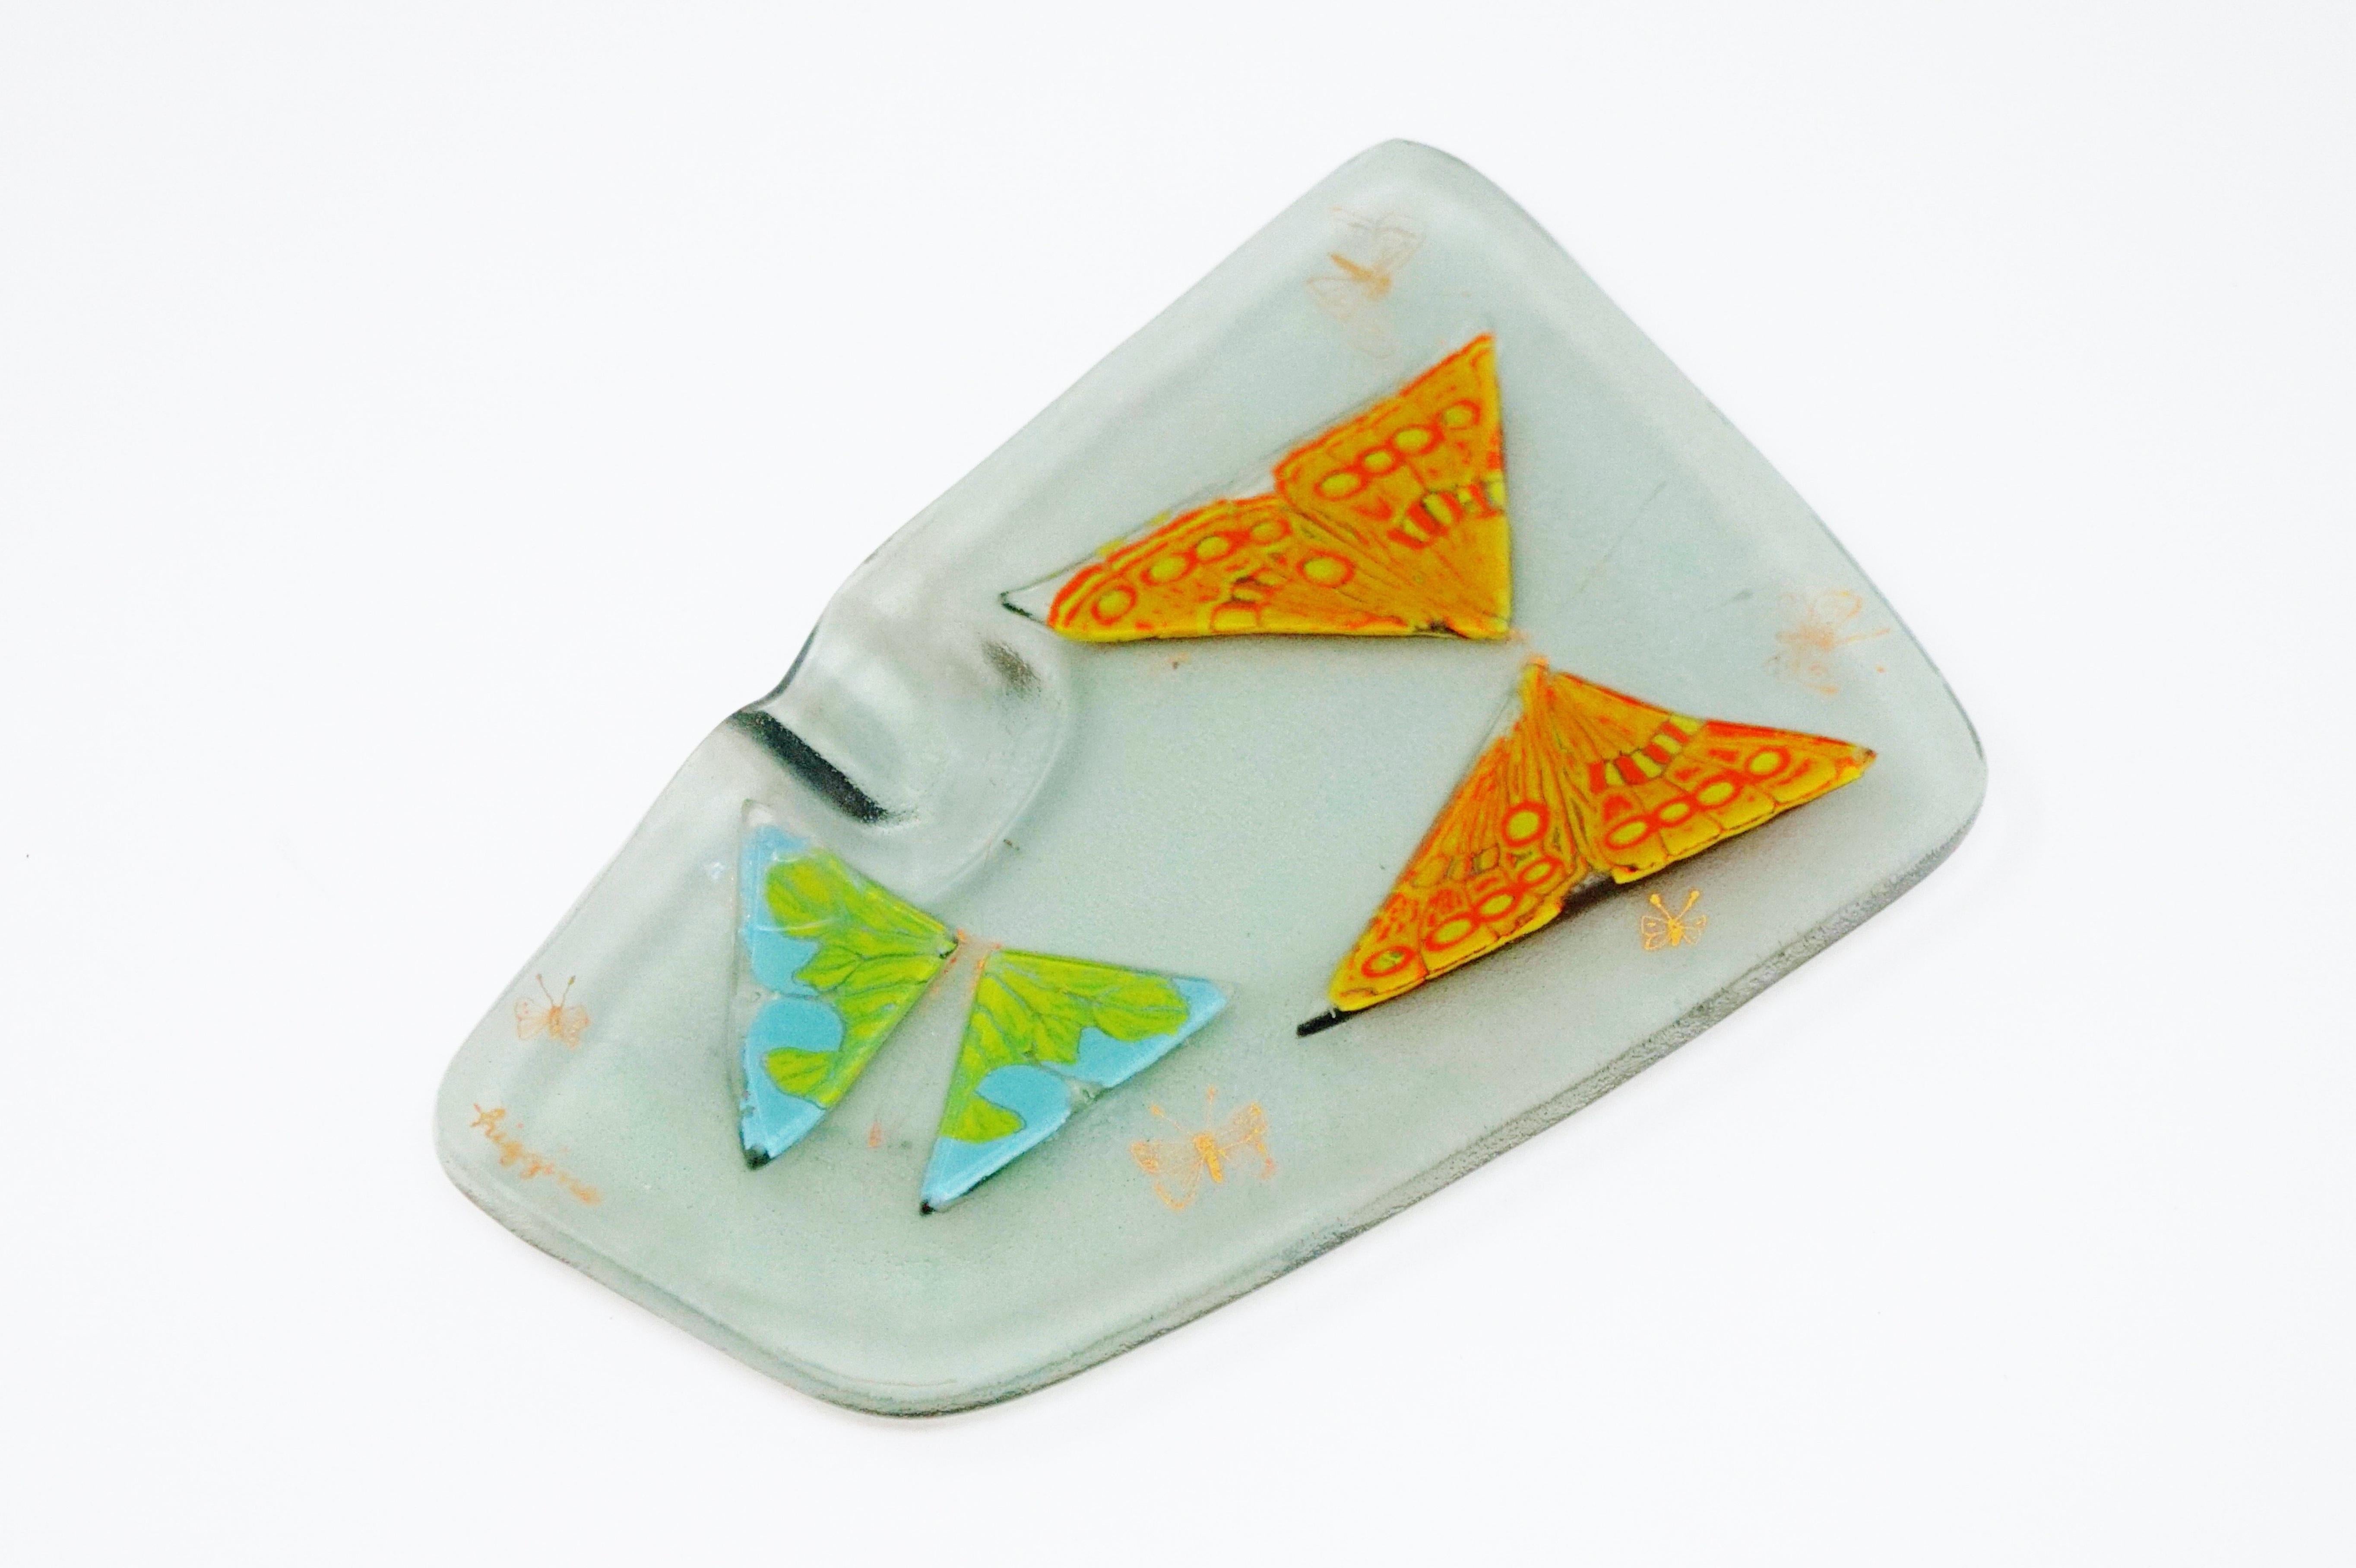 A fused glass ashtray by Michael and Francis Higgins circa 1950s with butterfly motif. 

Signed “Higgins”

Measures approximate: 4.5